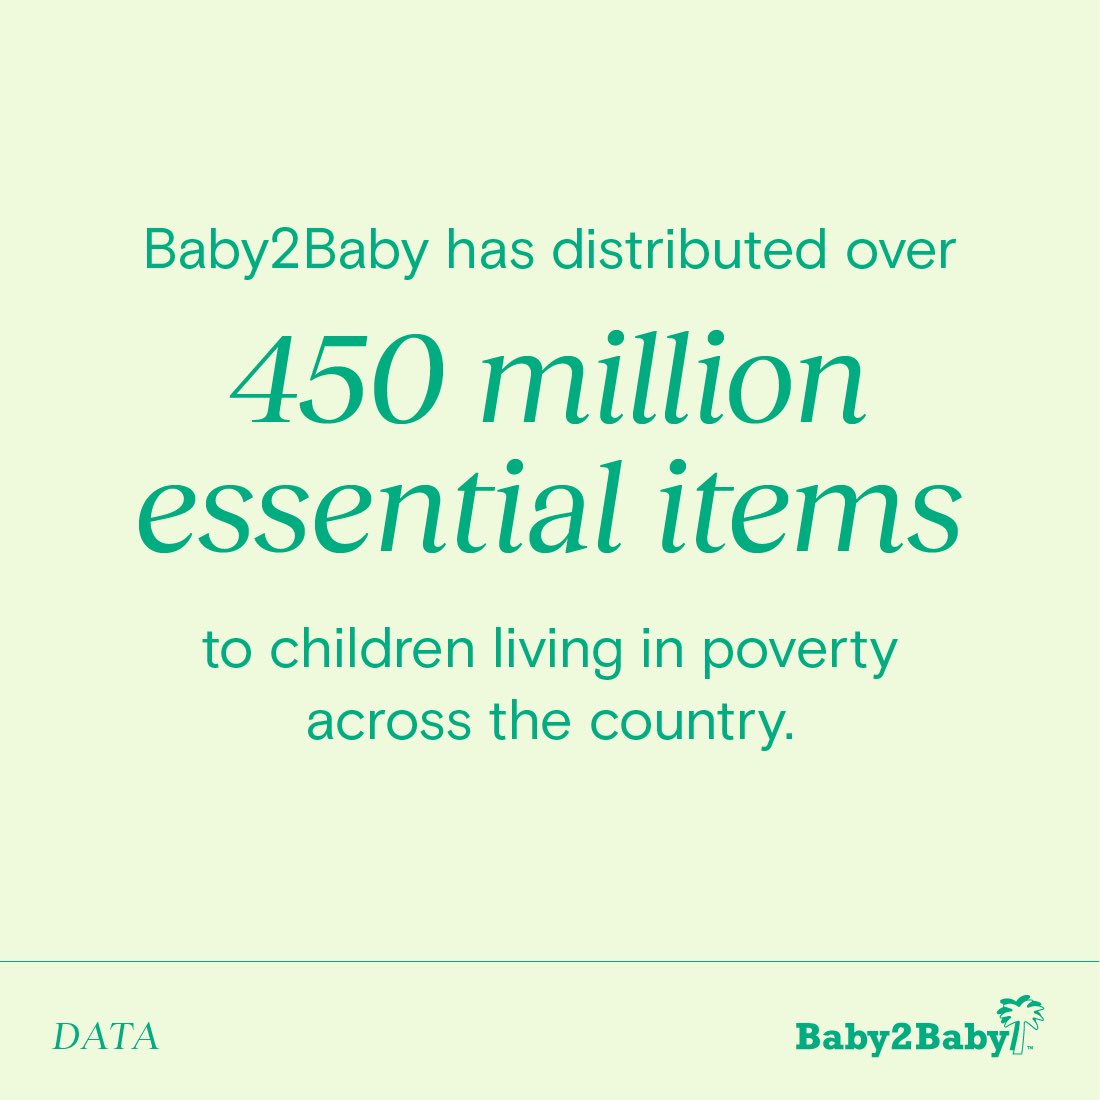 Baby2Baby has distributed over 450 million essential items to families living in poverty over the last 13 yrs. While we are proud of reaching this milestone, our work is far from over. Please donate to help continue providing basic necessities to children bit.ly/GiveToBaby2Baby